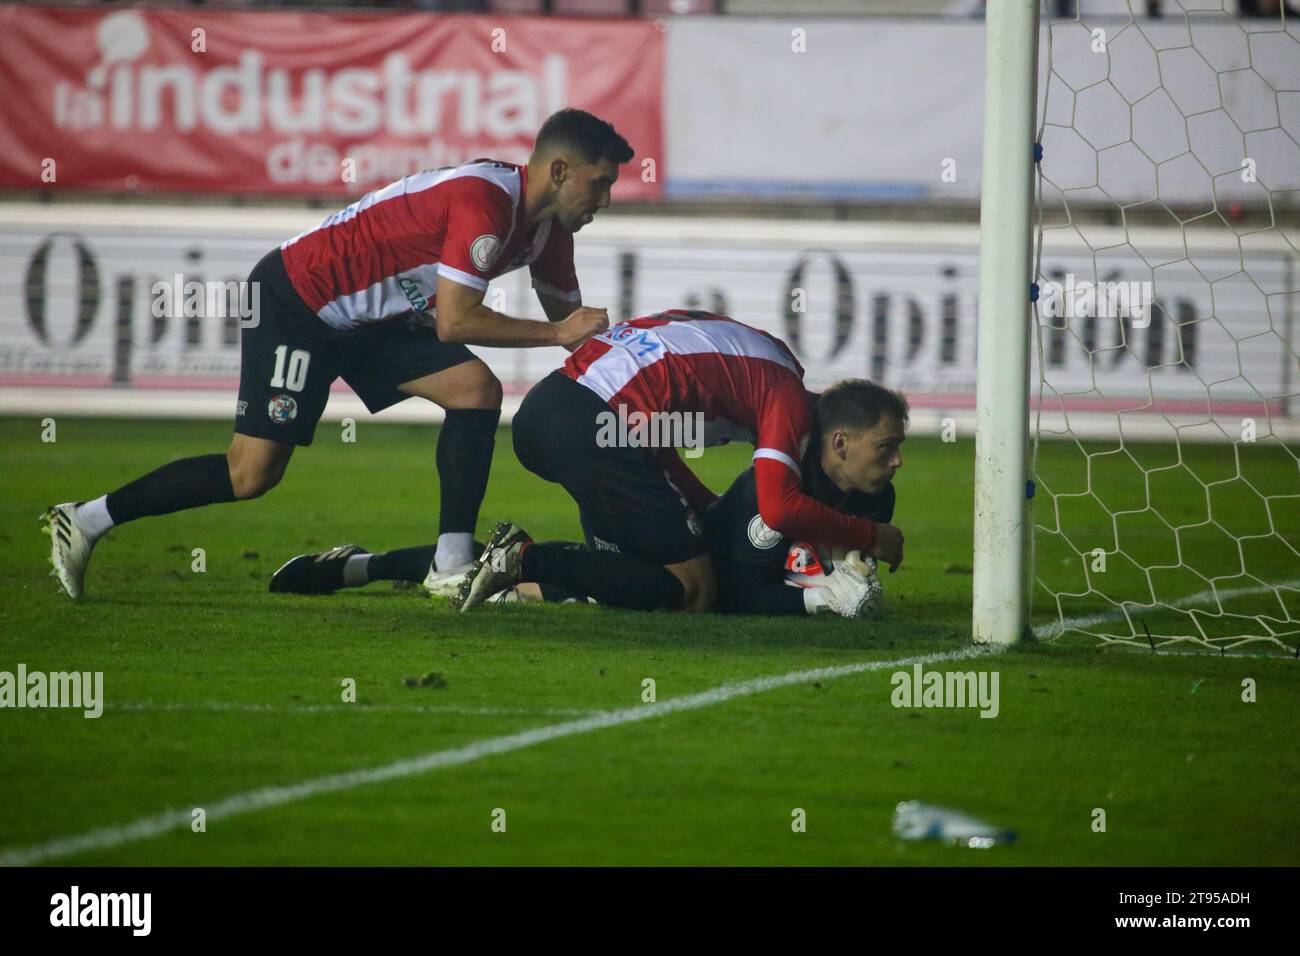 Zamora, Spain, 22th November, 2023: Zamora CF's goalkeeper, Fermin Soberon (13) with the ball is congratulated by his teammates during the Second round of the SM El Rey Cup 2023-24 between Zamora CF and Villarreal CF , on November 22, 2023, at the Ruta de la Plata Stadium, in Zamora, Spain. Credit: Alberto Brevers / Alamy Live News Stock Photo